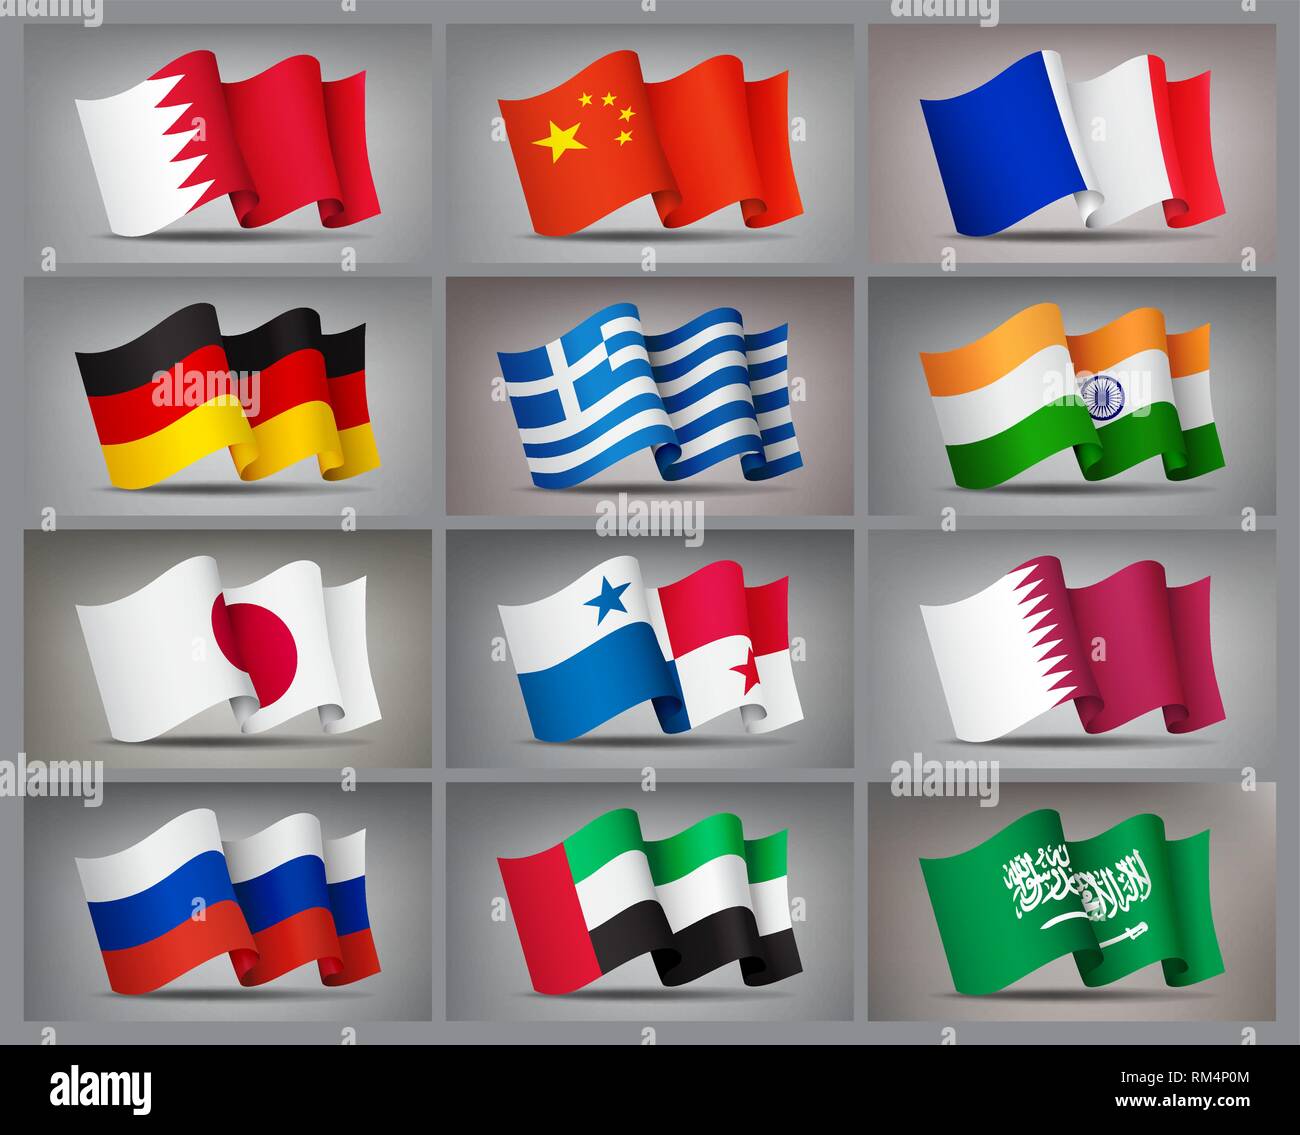 Set of waving flags icons isolated, official symbols of countrys, vector illustration. Stock Vector